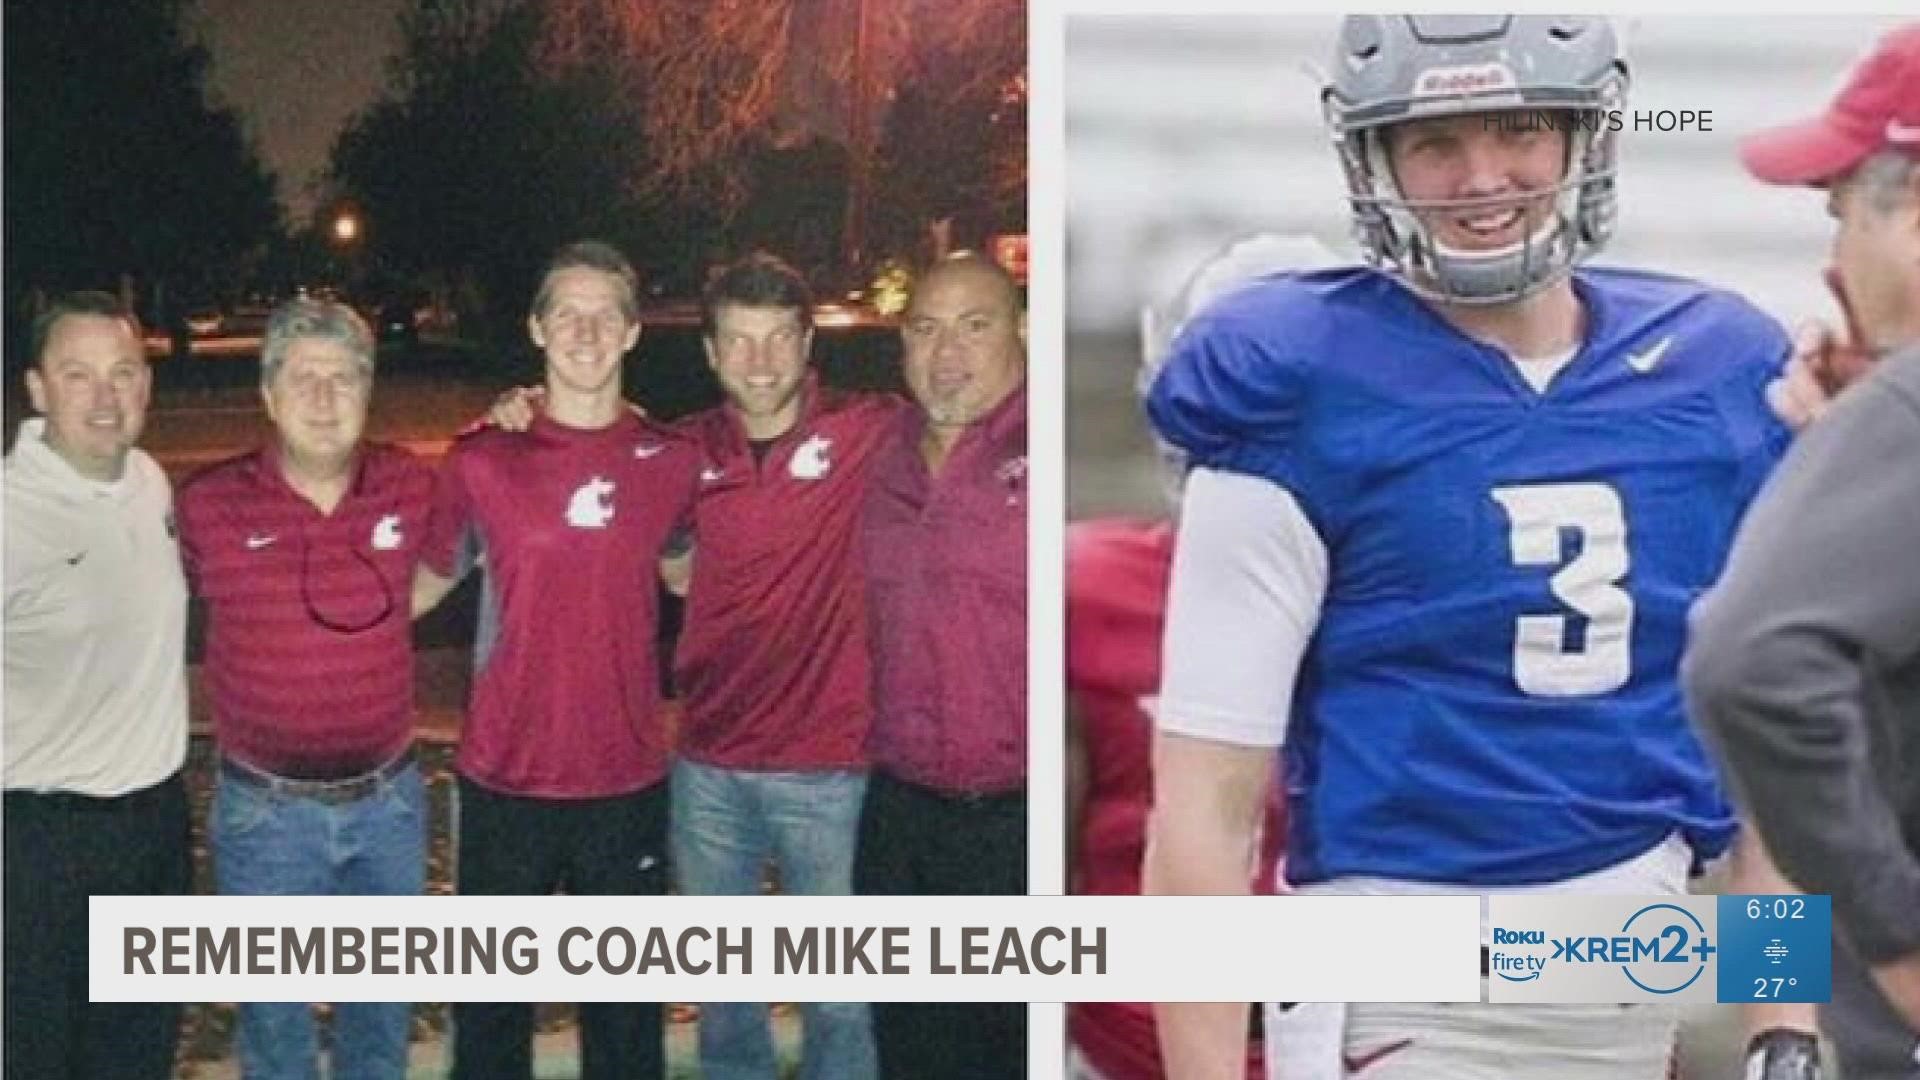 You'll always remember your favorite coach, and WSU's former football coach Mike Leach is one the Hilinski family will likely never forget.